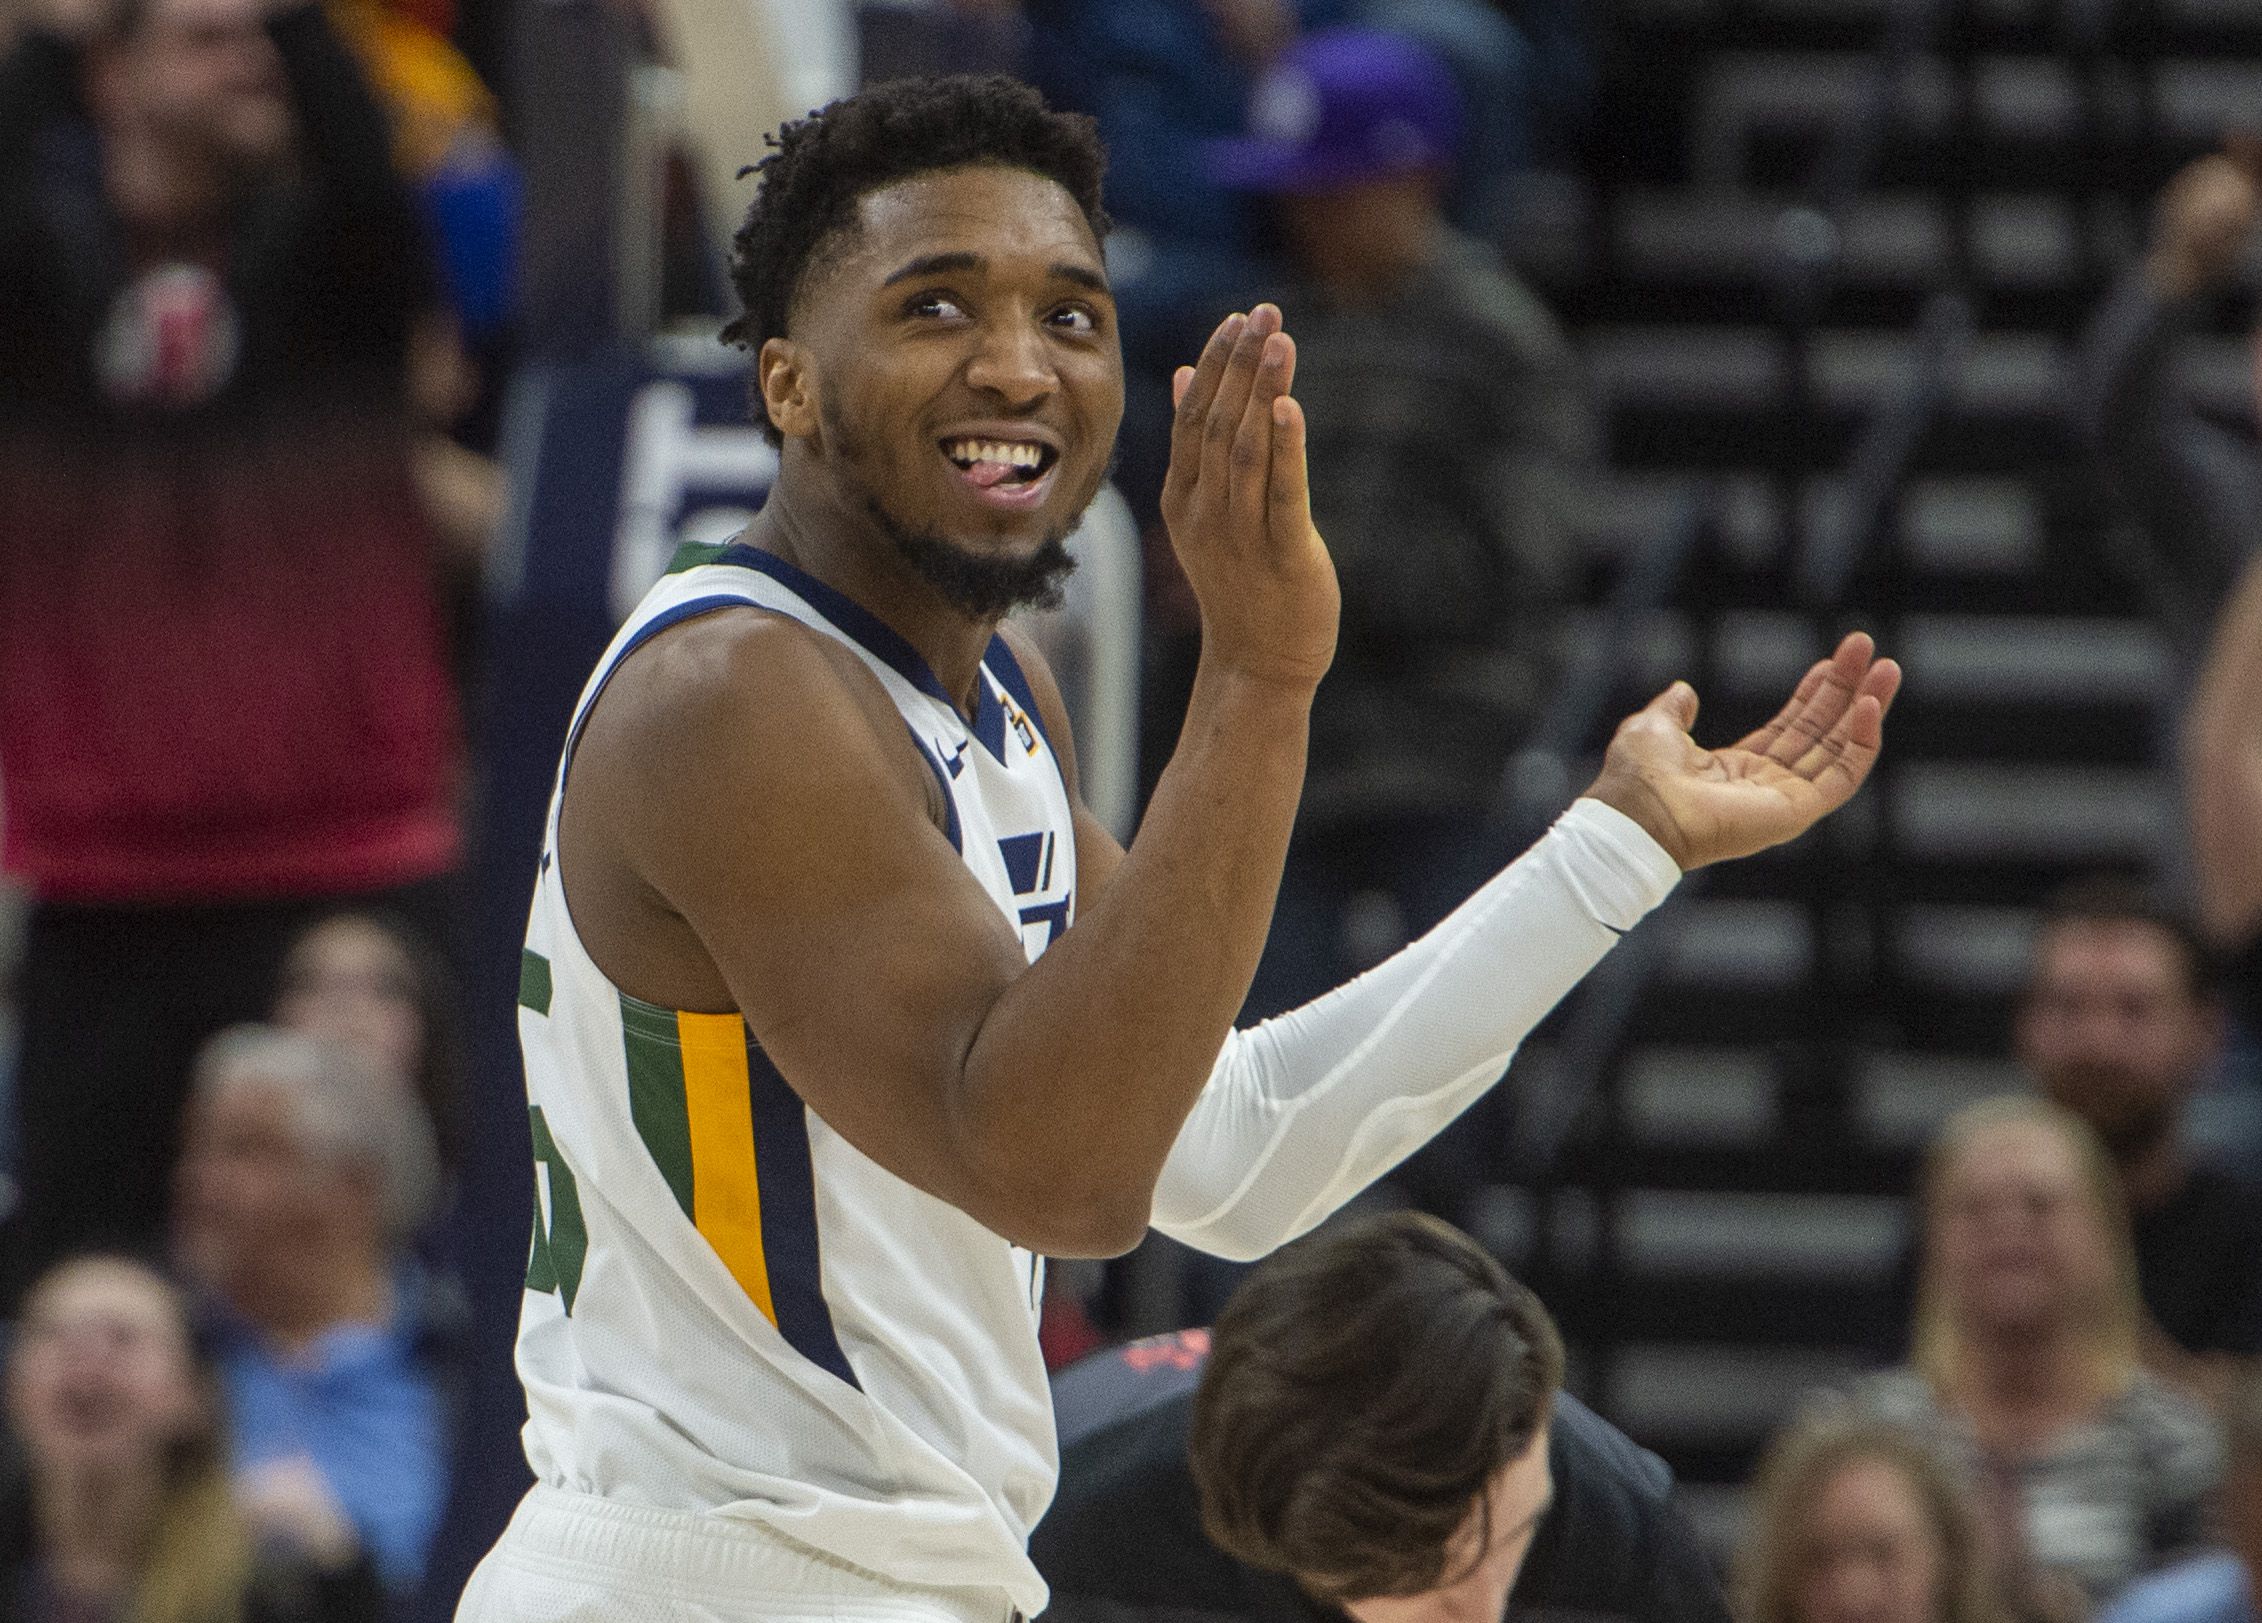 Utah Jazz star Donovan Mitchell to give U's 2021 commencement address –  @theU